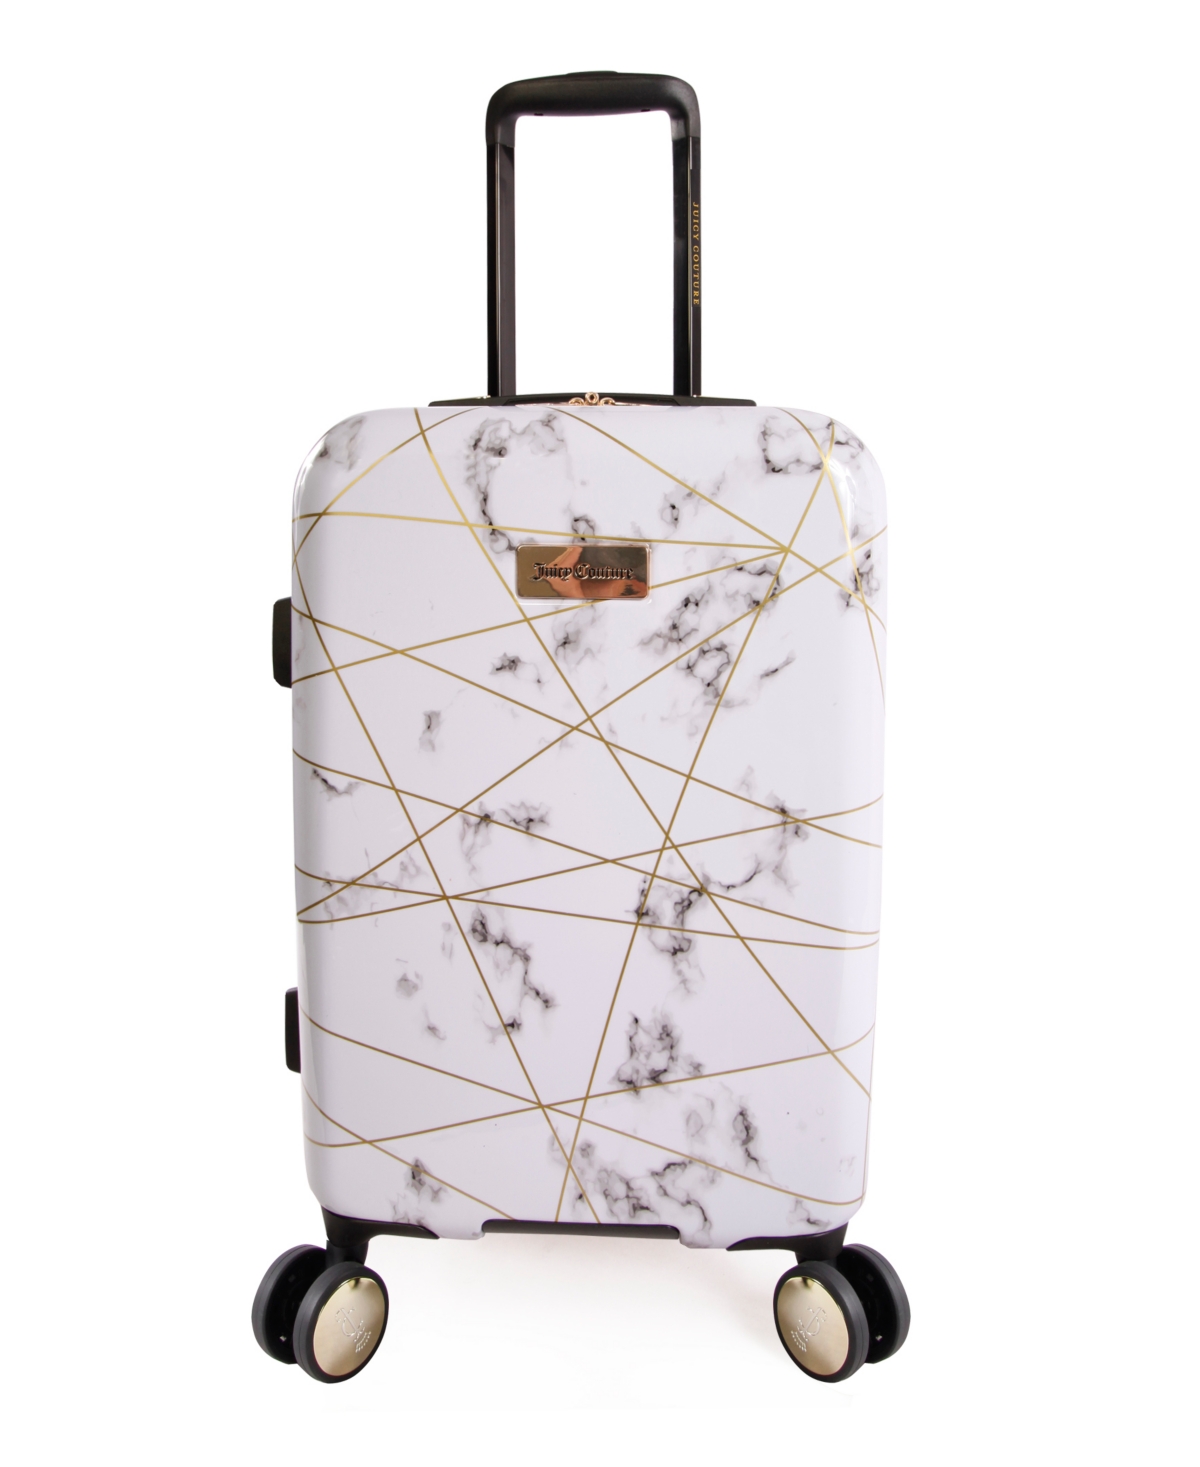 Vivian 21" Carry-On Spinner Luggage - Marble Web